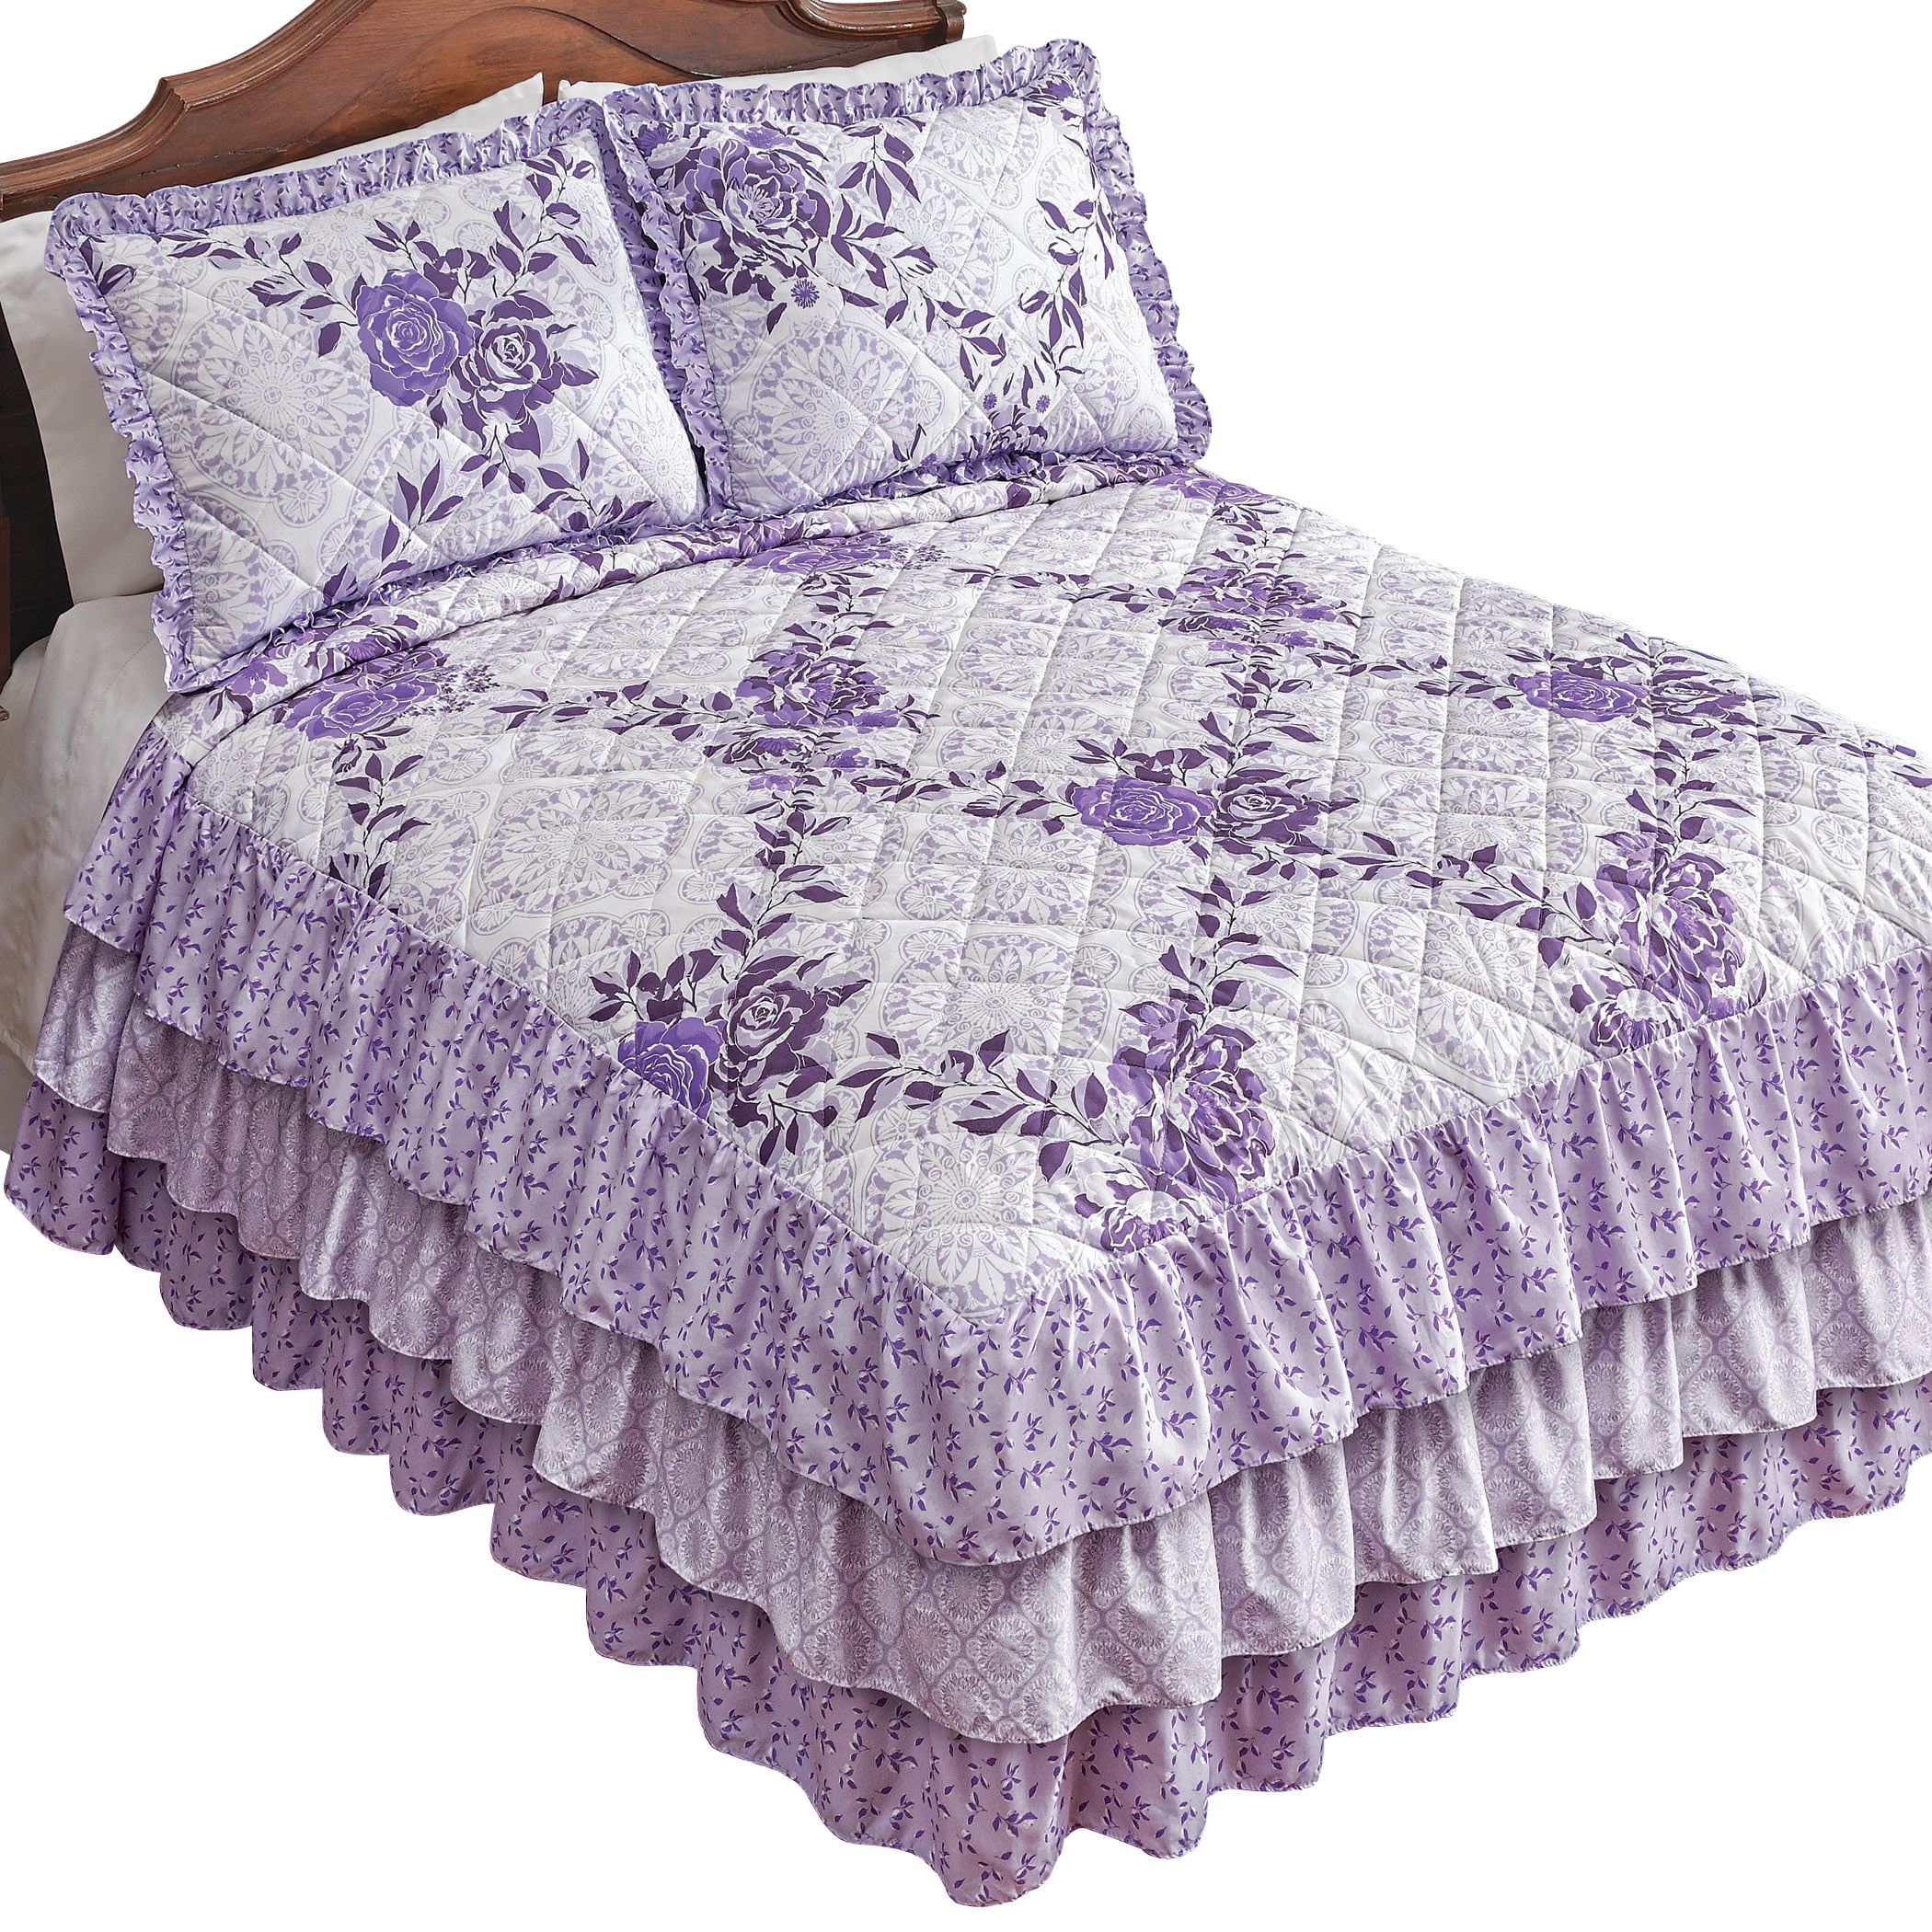 Goldstar ® Rosaleen Lilac Double Quilted Bedspread Polycotton Floral Printed Frilled Throw With 2 Pillow Shams